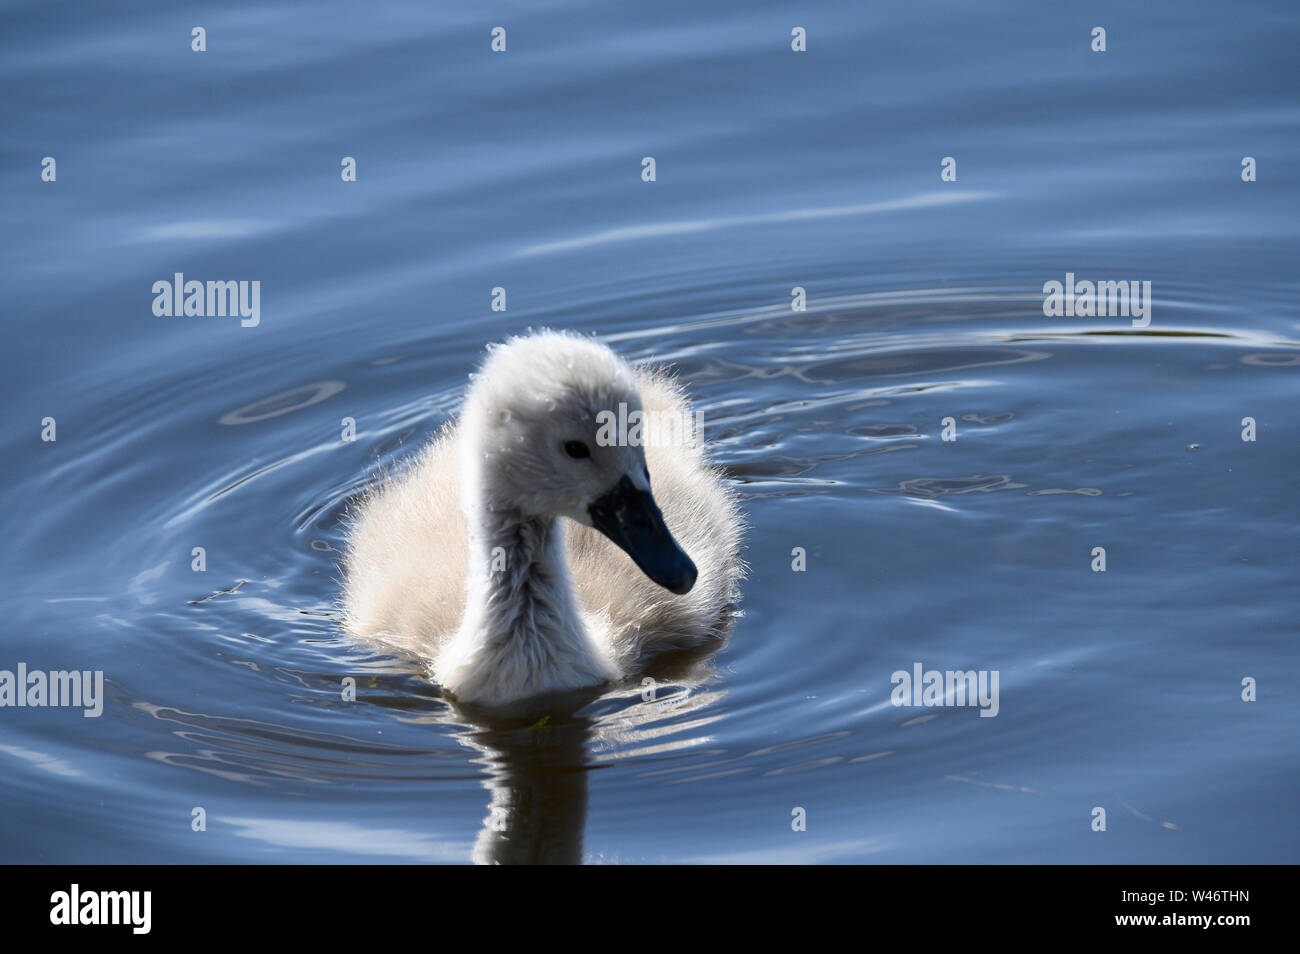 A Cygnet or better refered to as a young swan swimming around Stock Photo